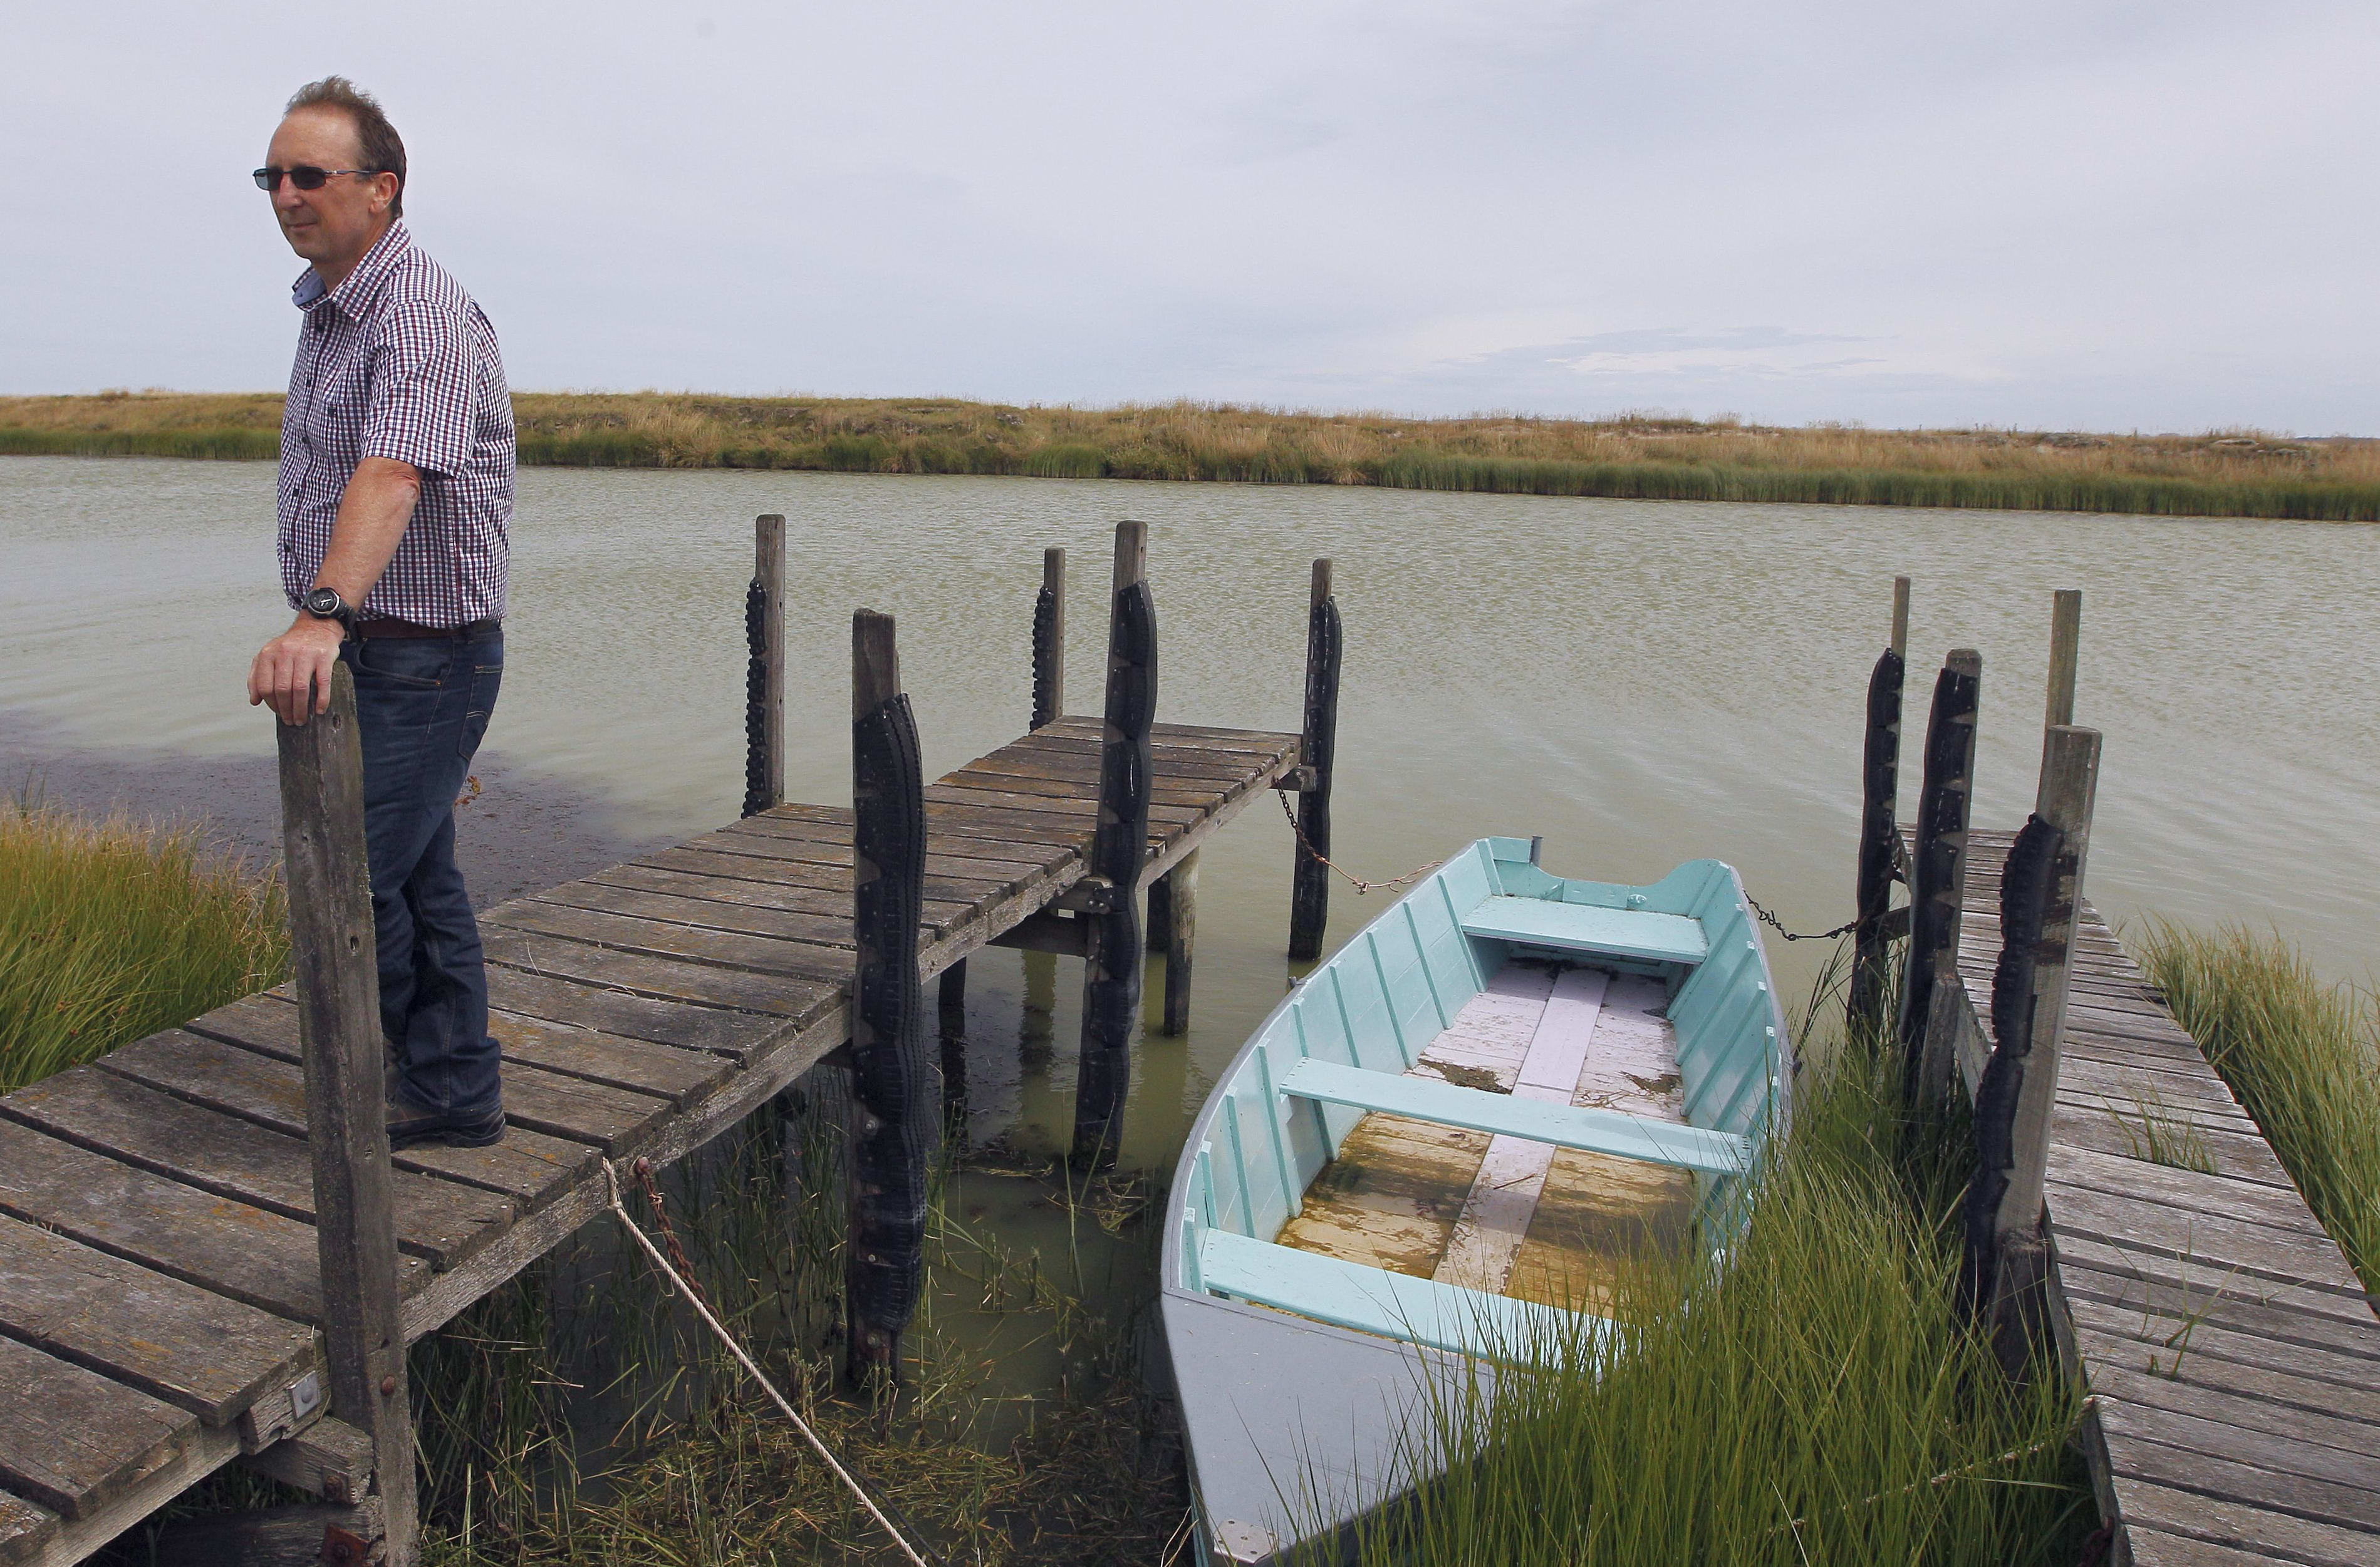 Man stands on small wooden jetty on edge of murky river by small wooden boat